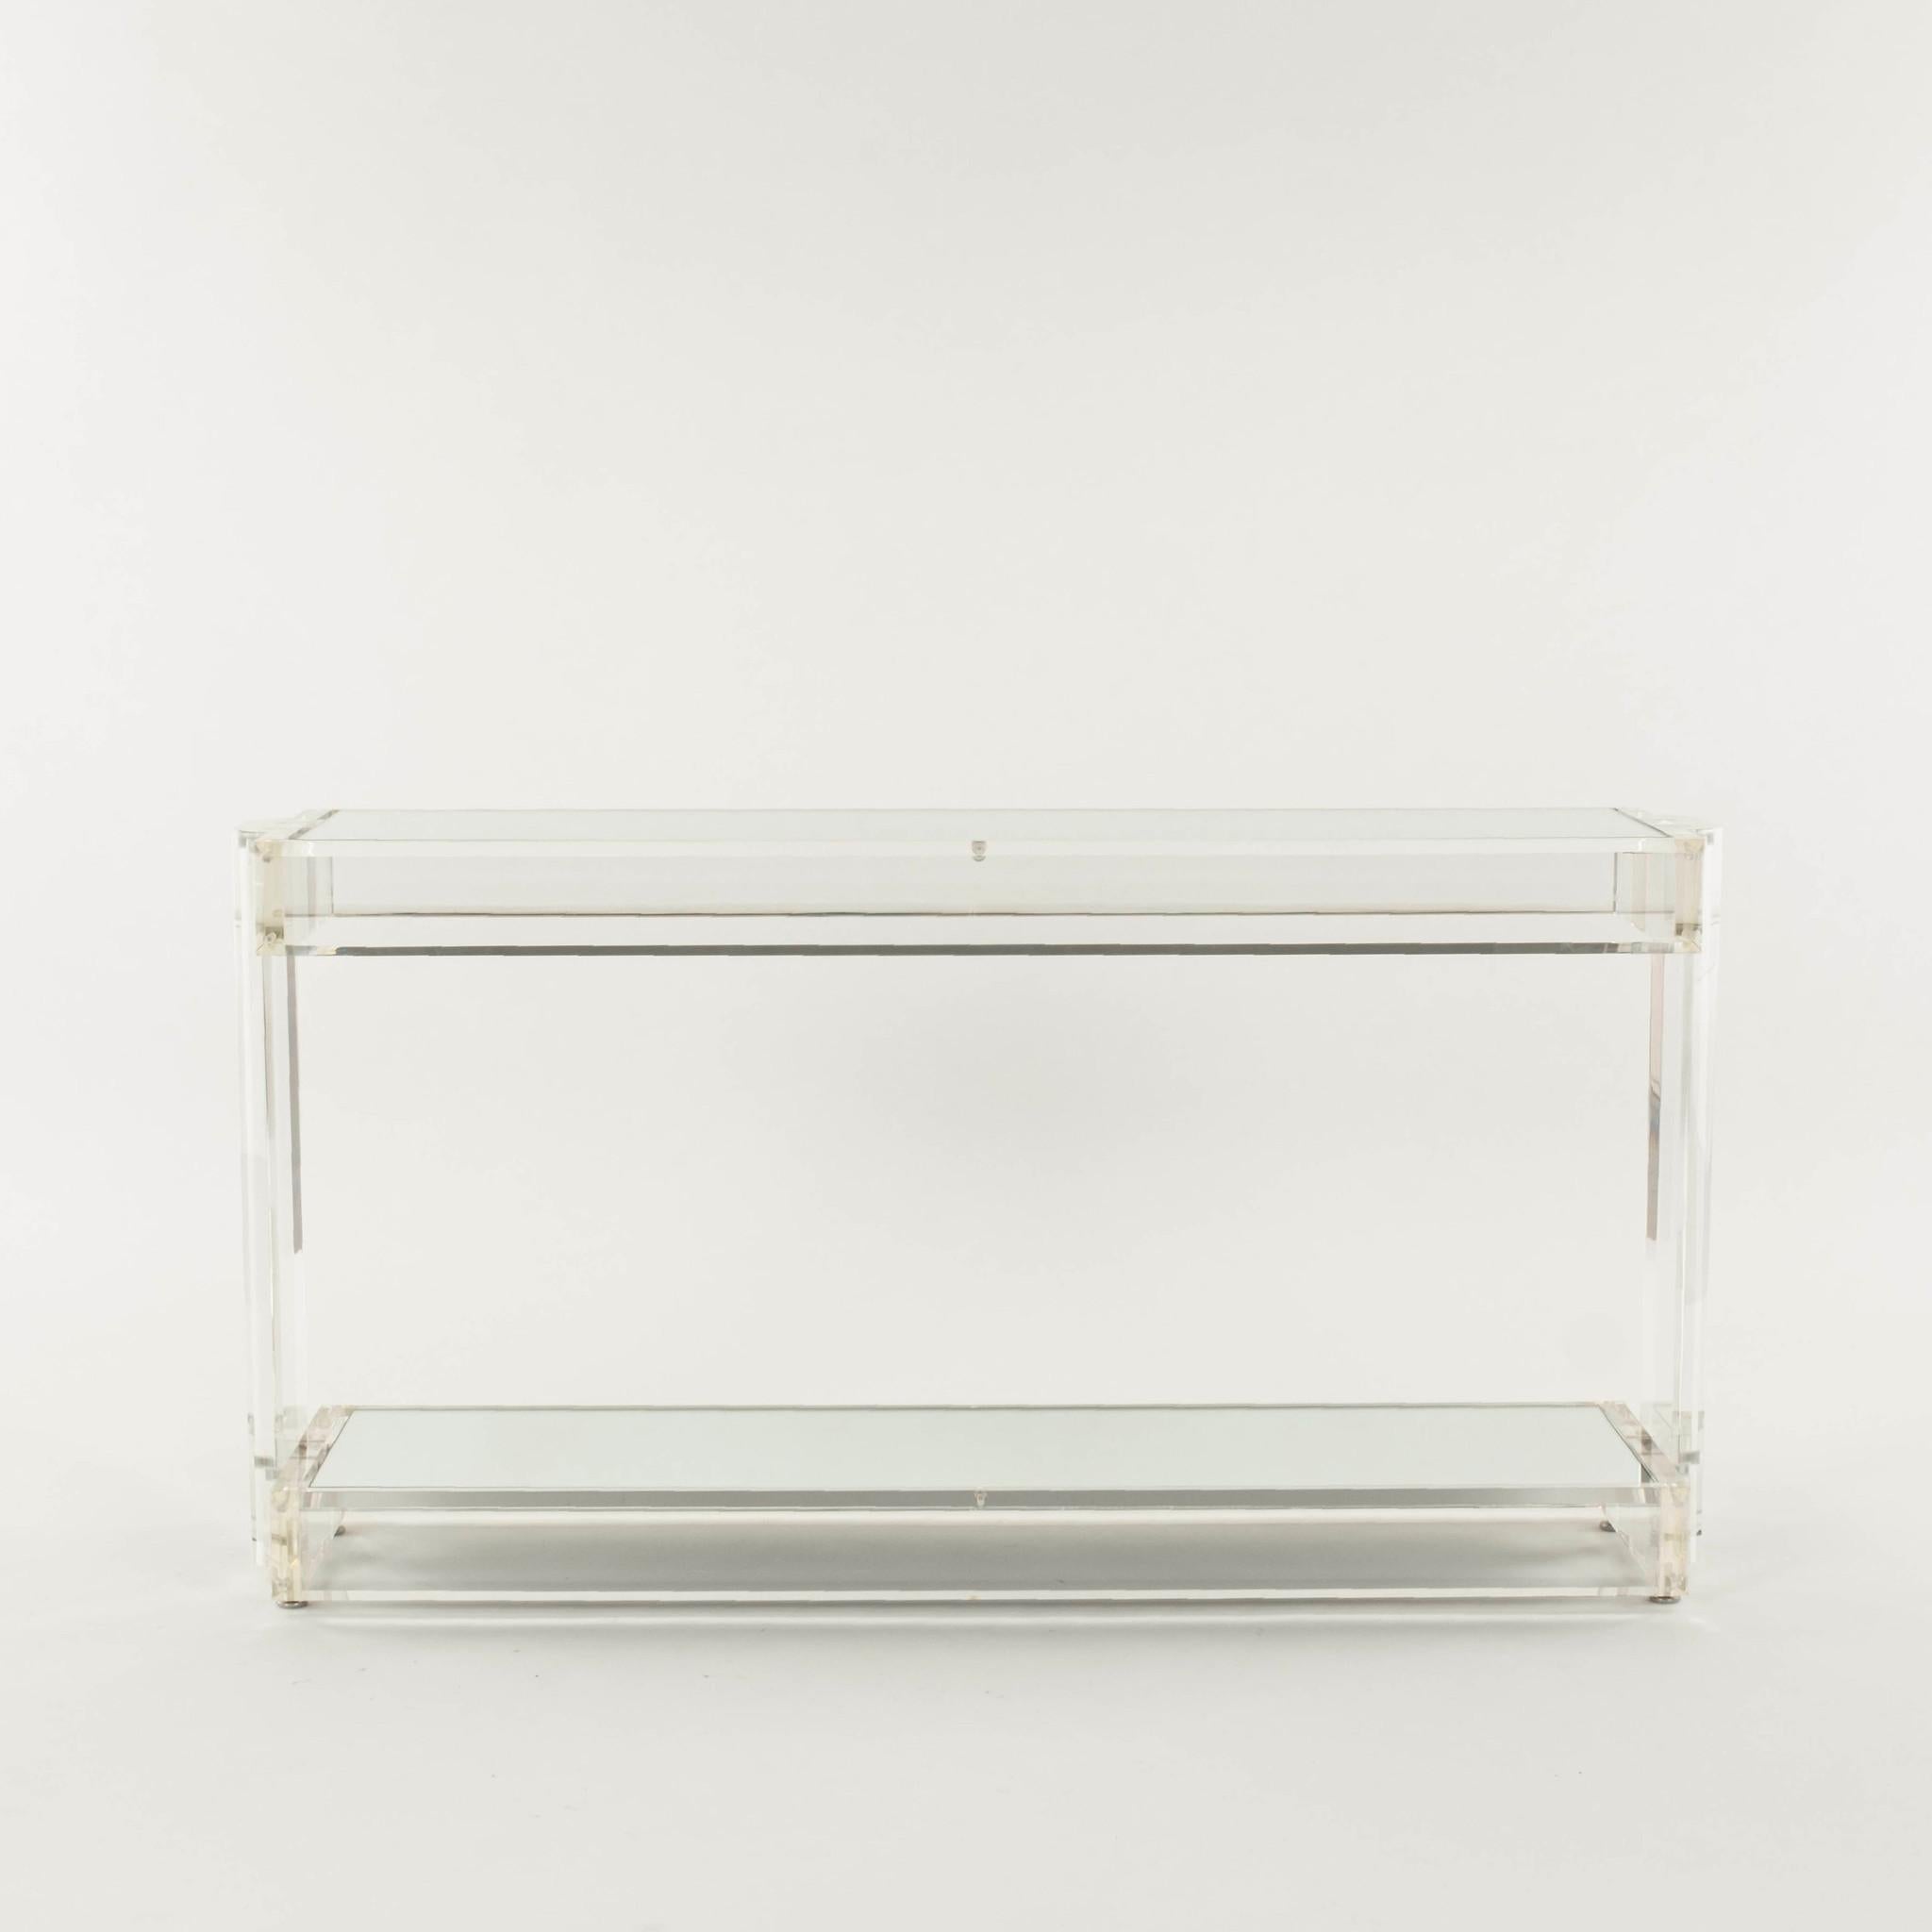 Vintage slab lucite consoled with mirrored top.